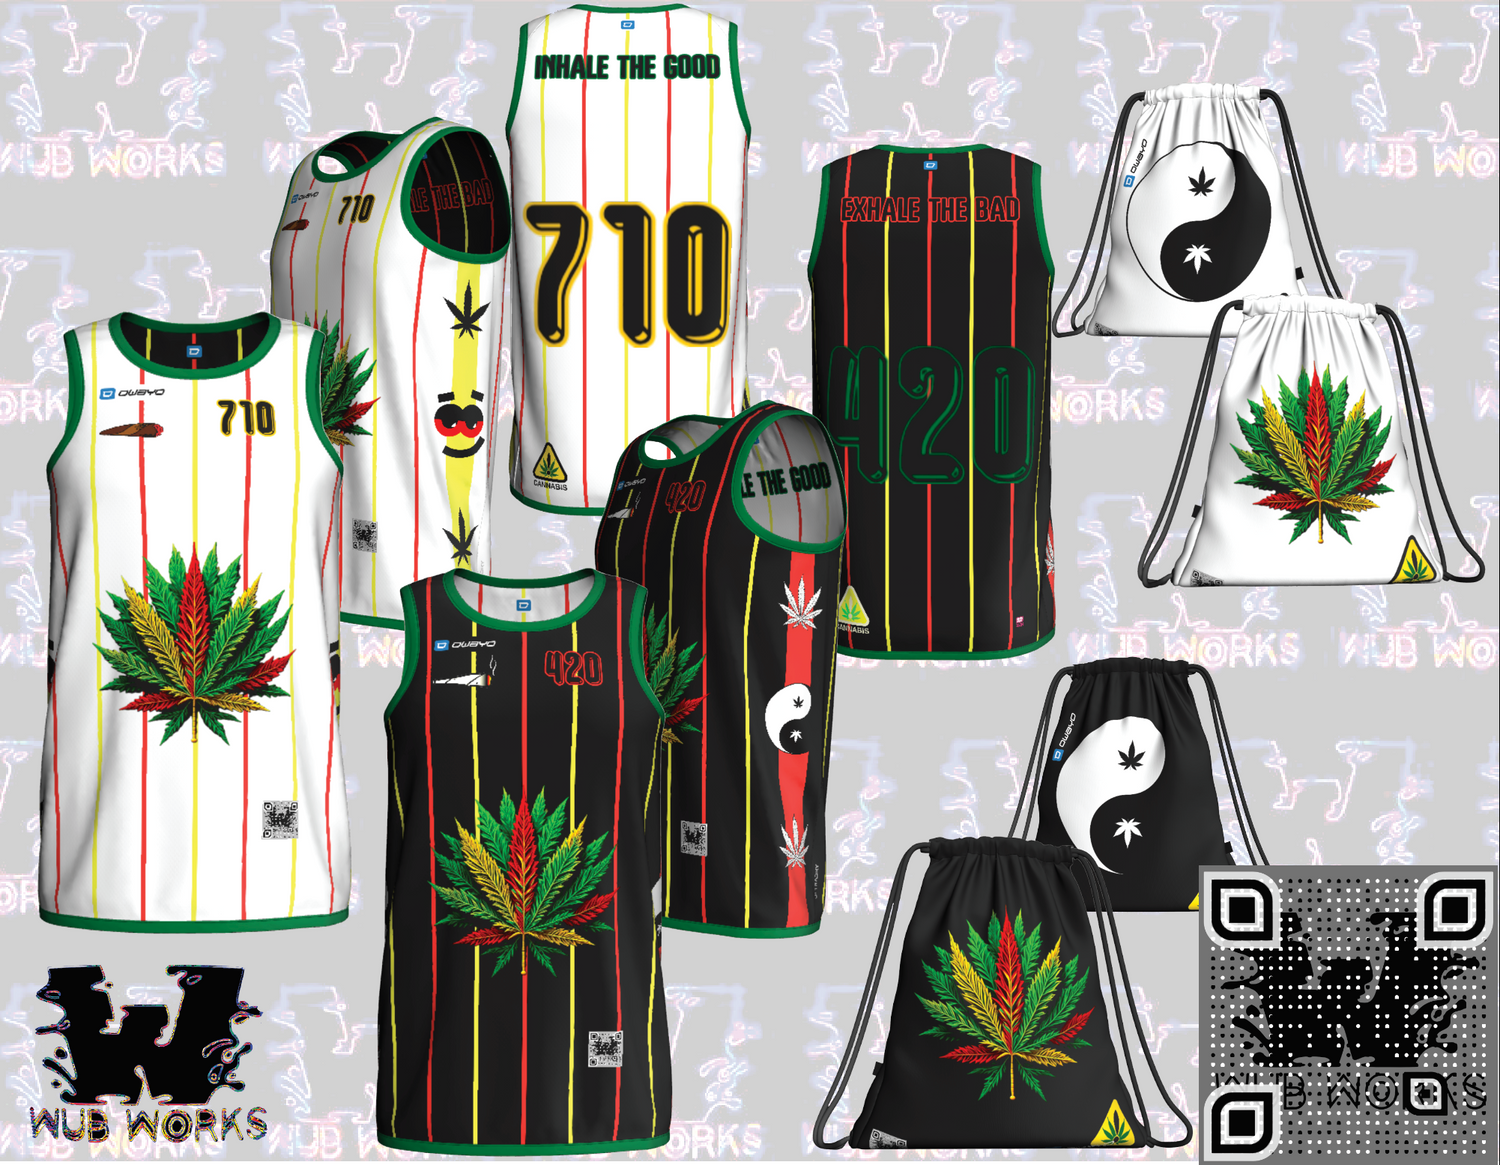 "Rip-n-Flip" - 420 Collection